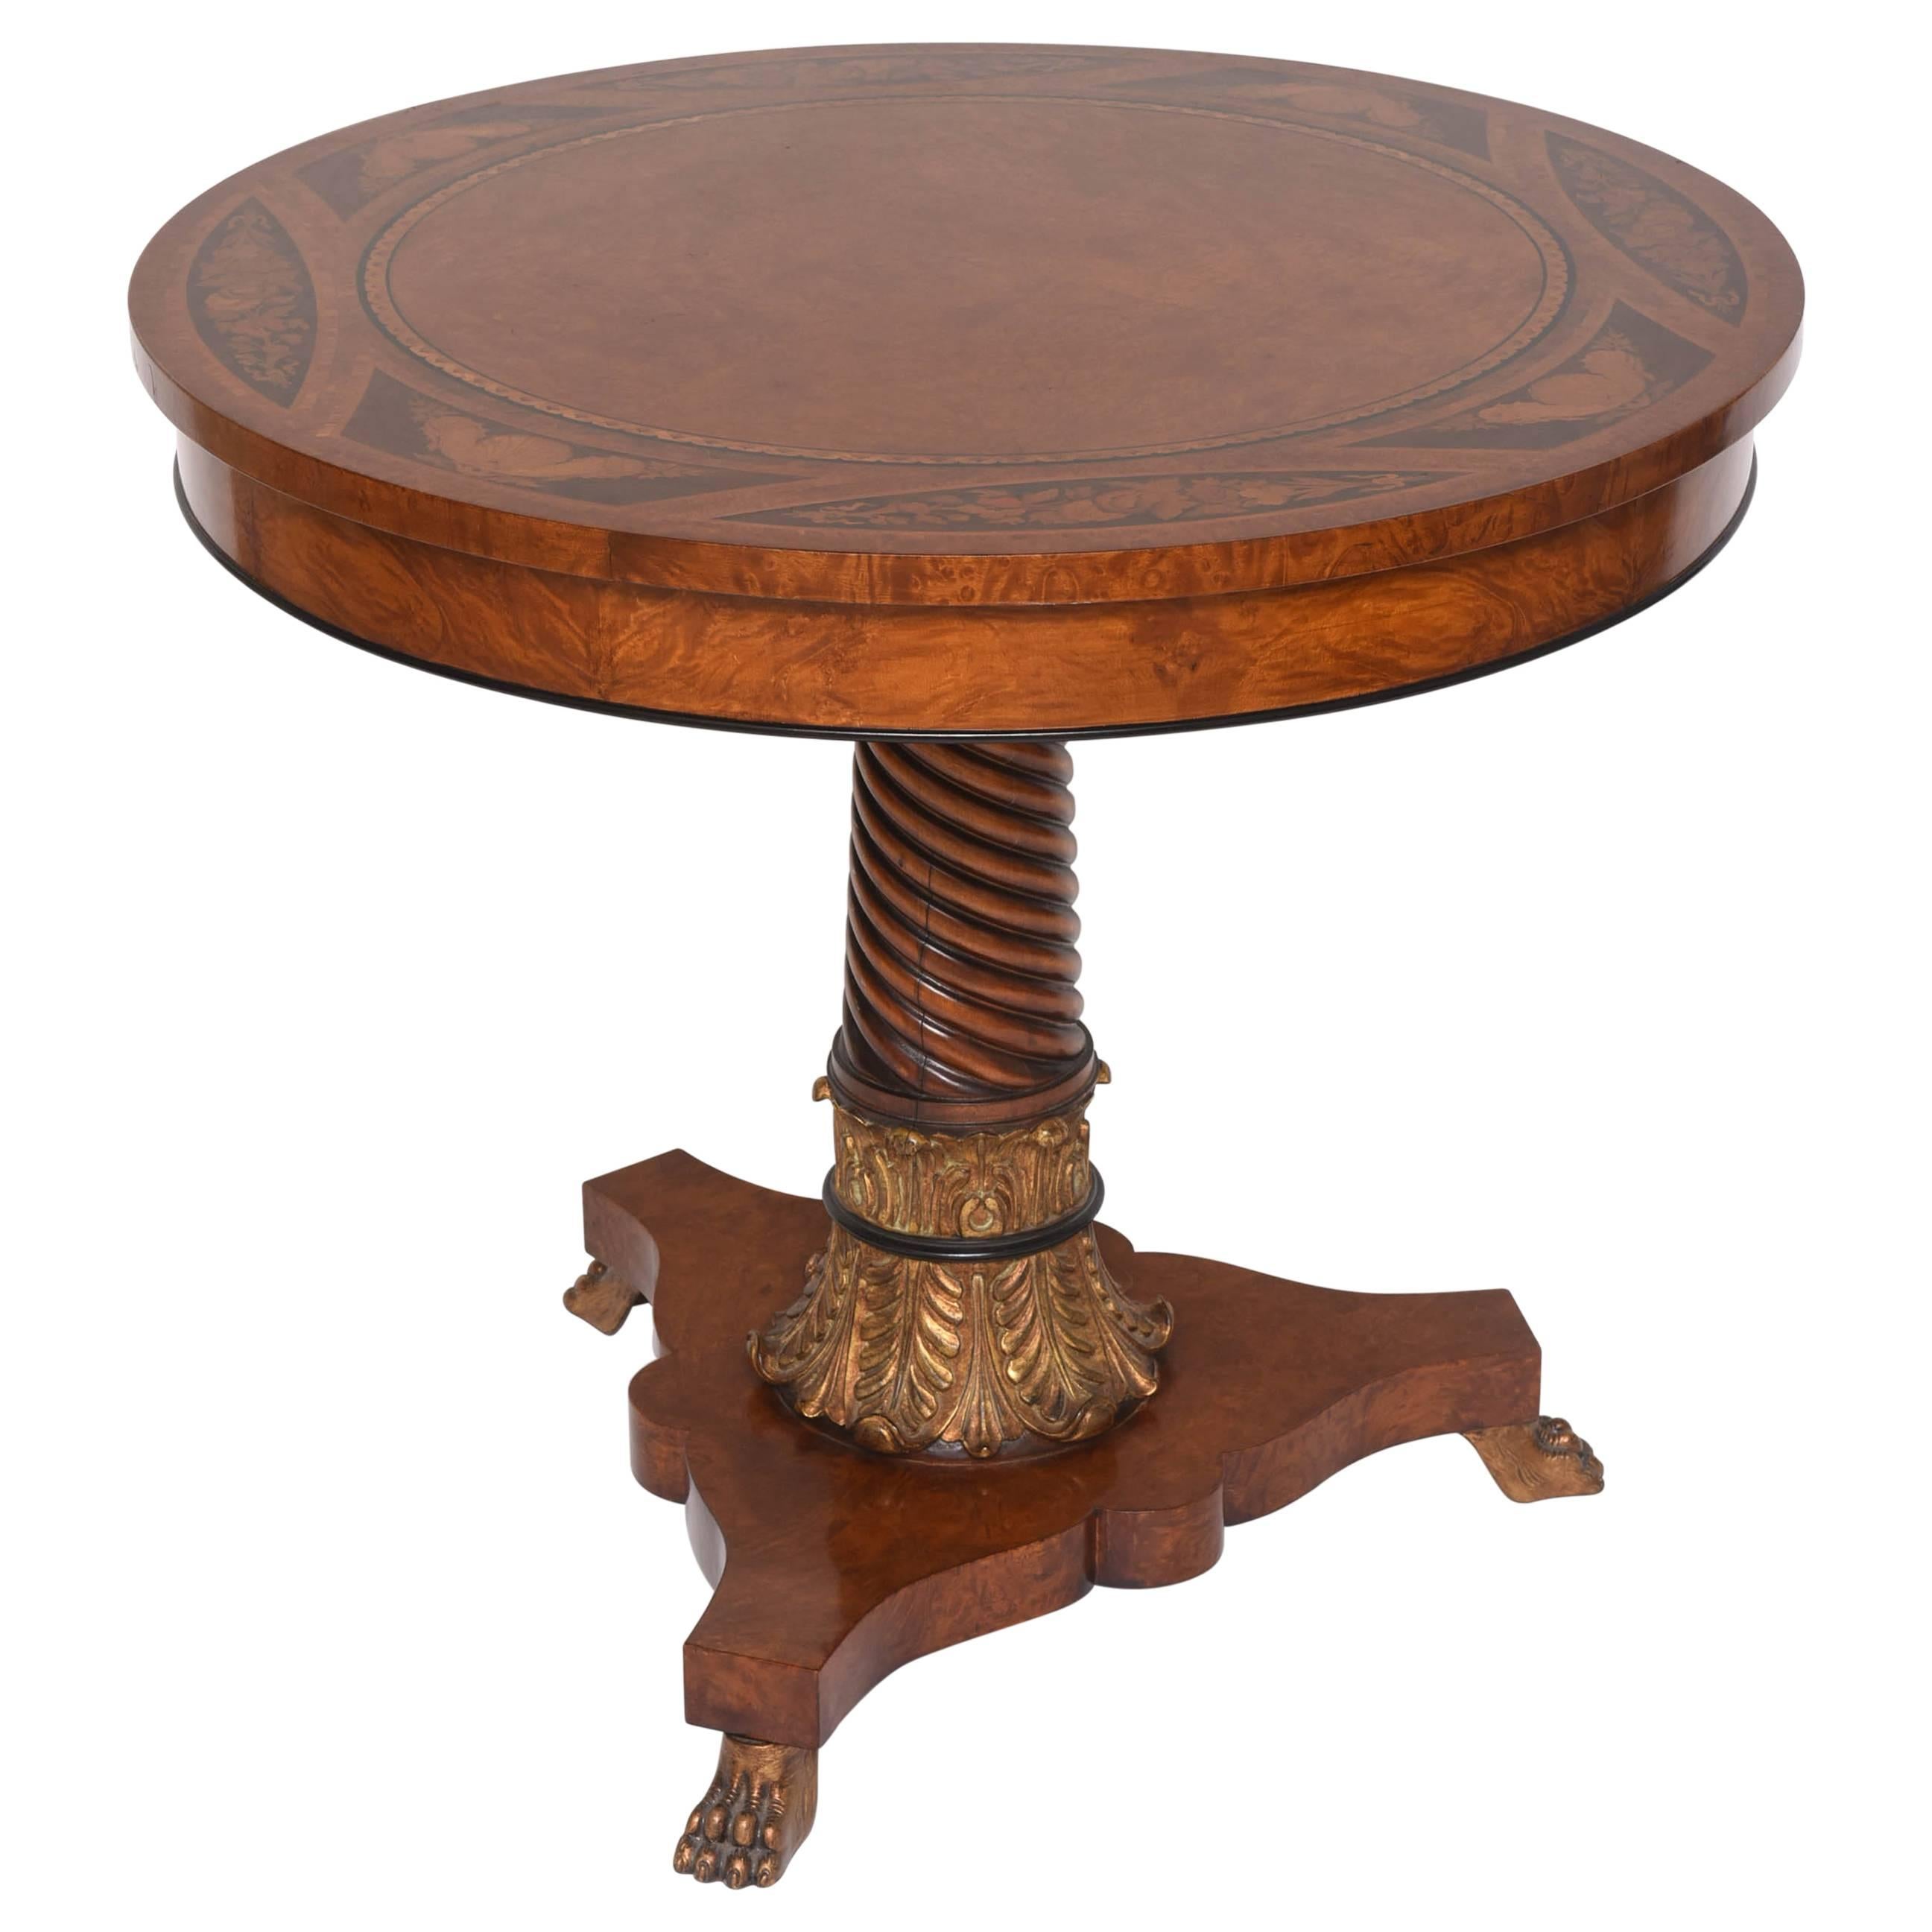 Neoclassical Style Center Table with Marquetry Top, Rho Mobili D' Epoca, Italy